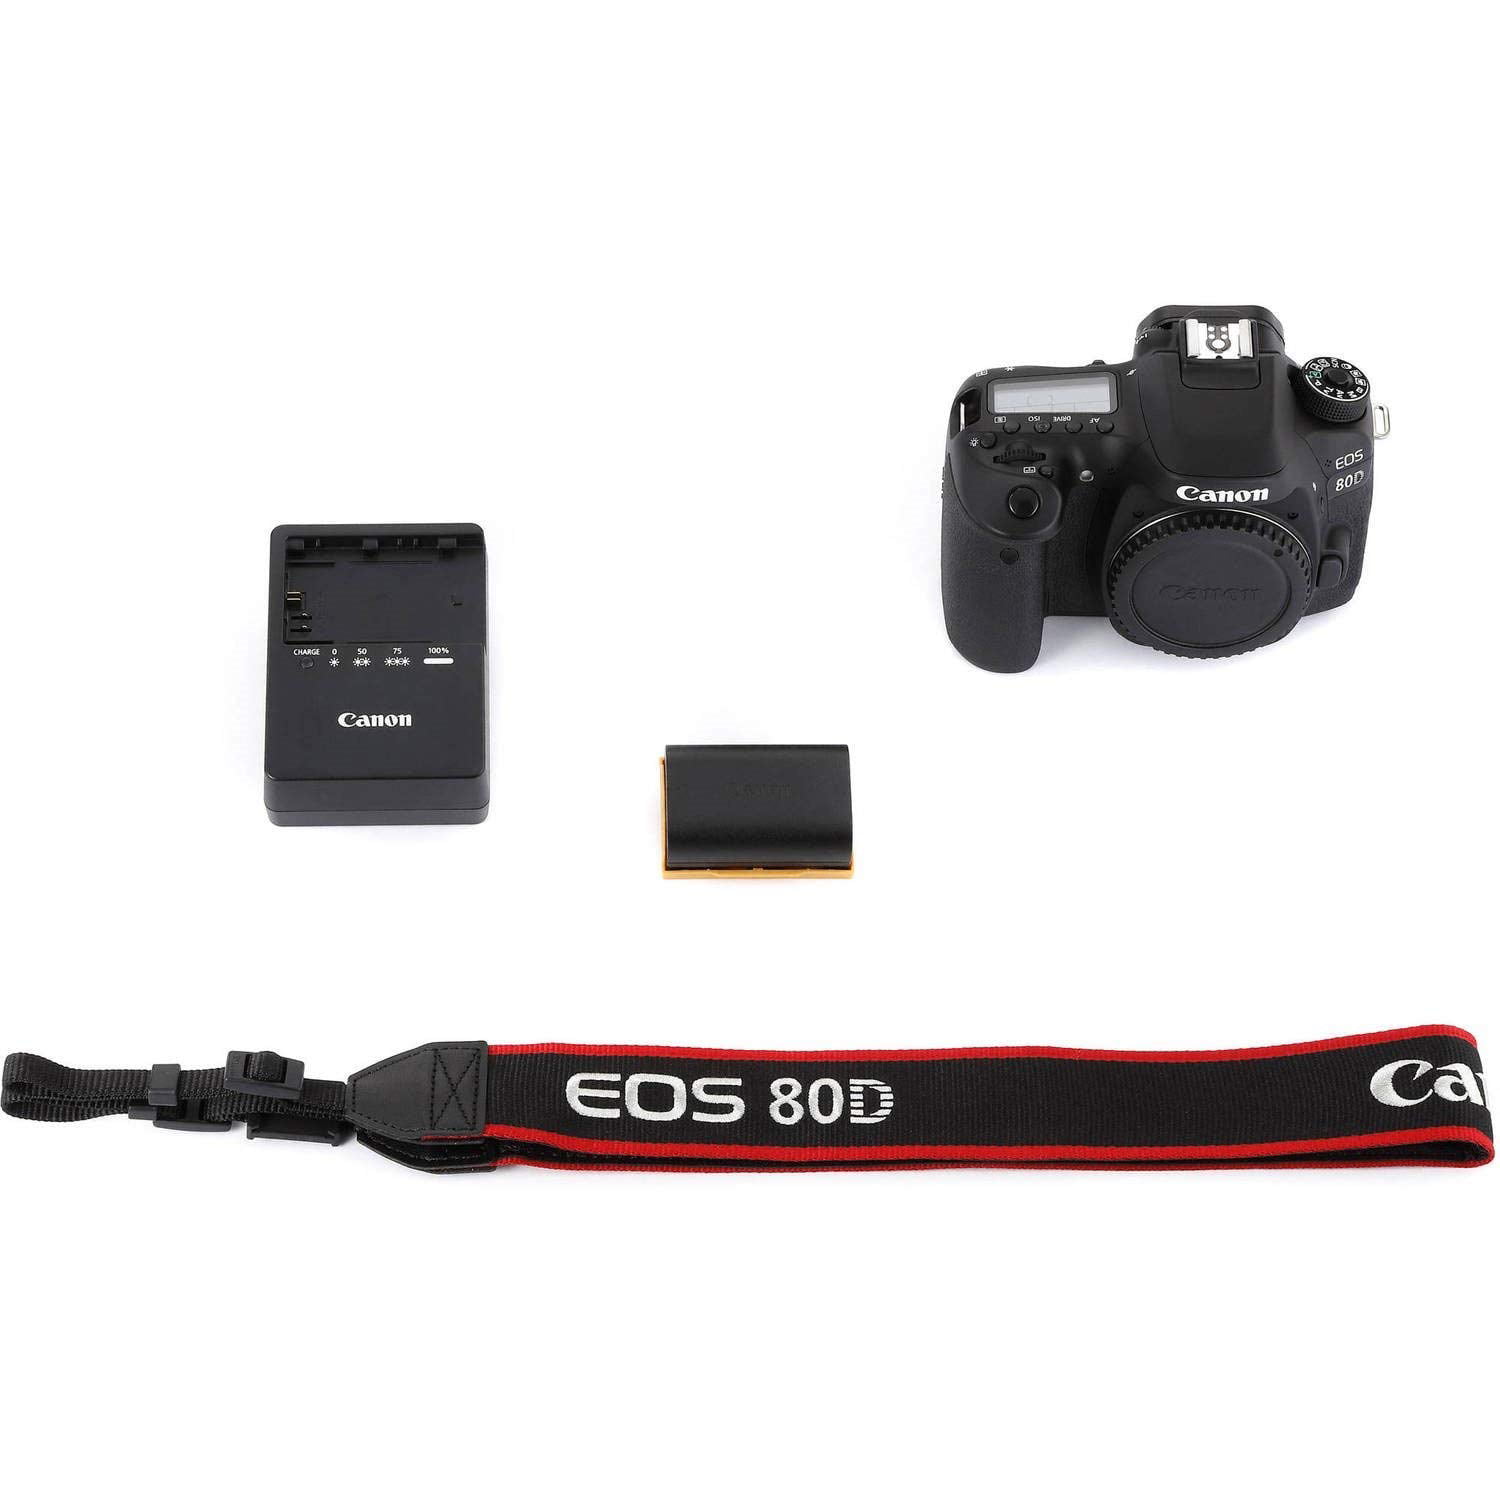 Canon EOS 80D Digital SLR Camera Video Creator Kit with EF-S 18 